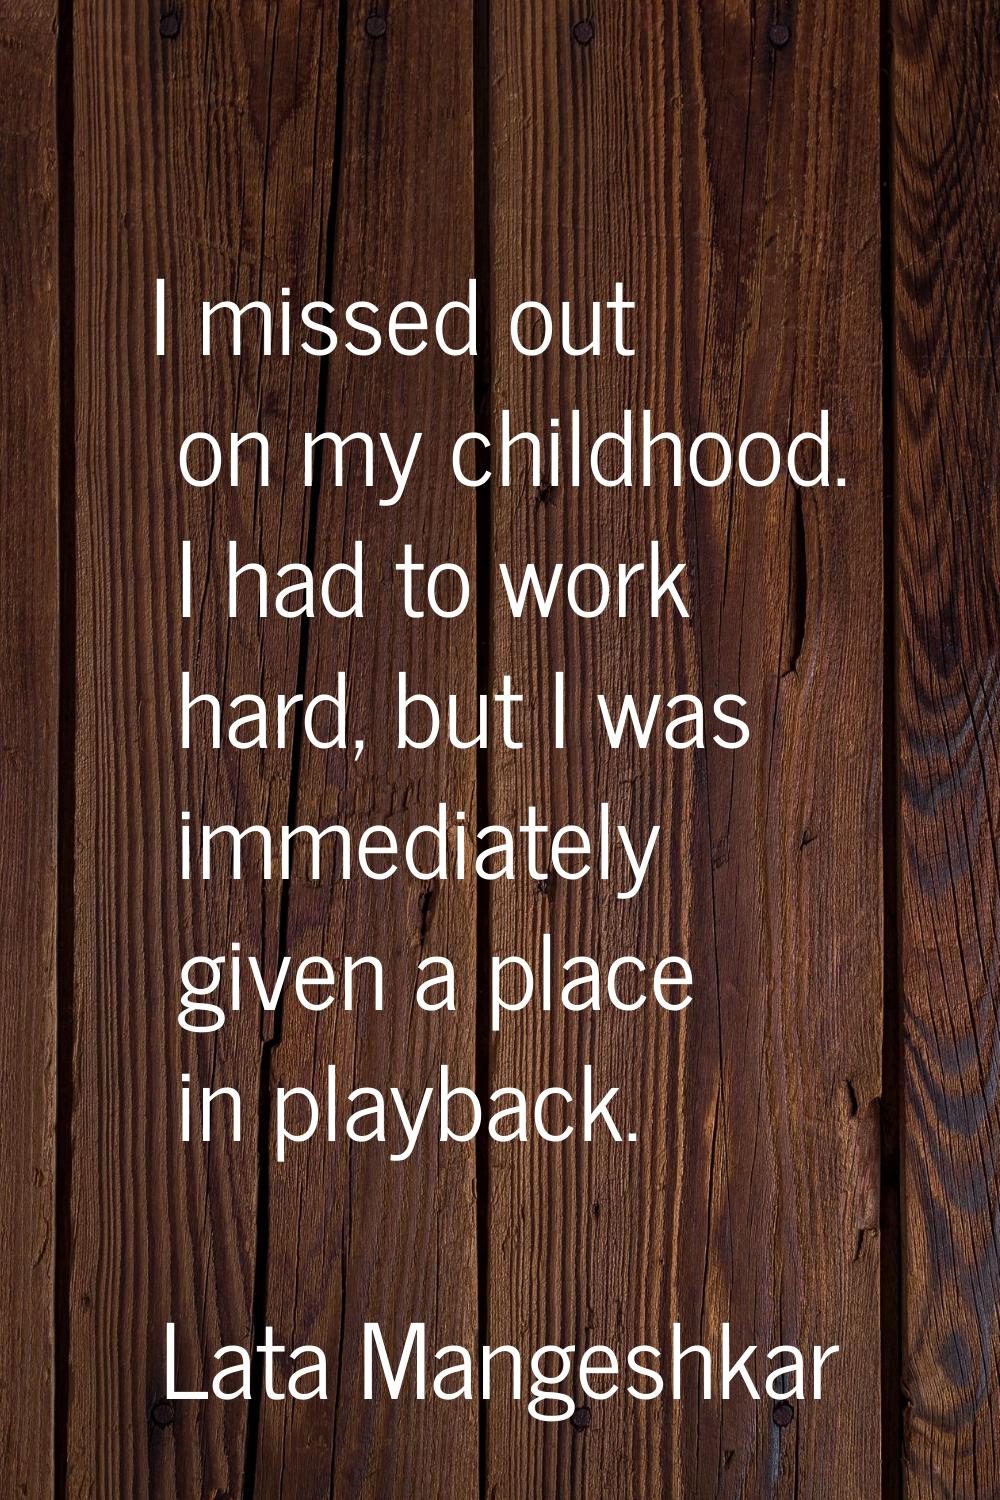 I missed out on my childhood. I had to work hard, but I was immediately given a place in playback.